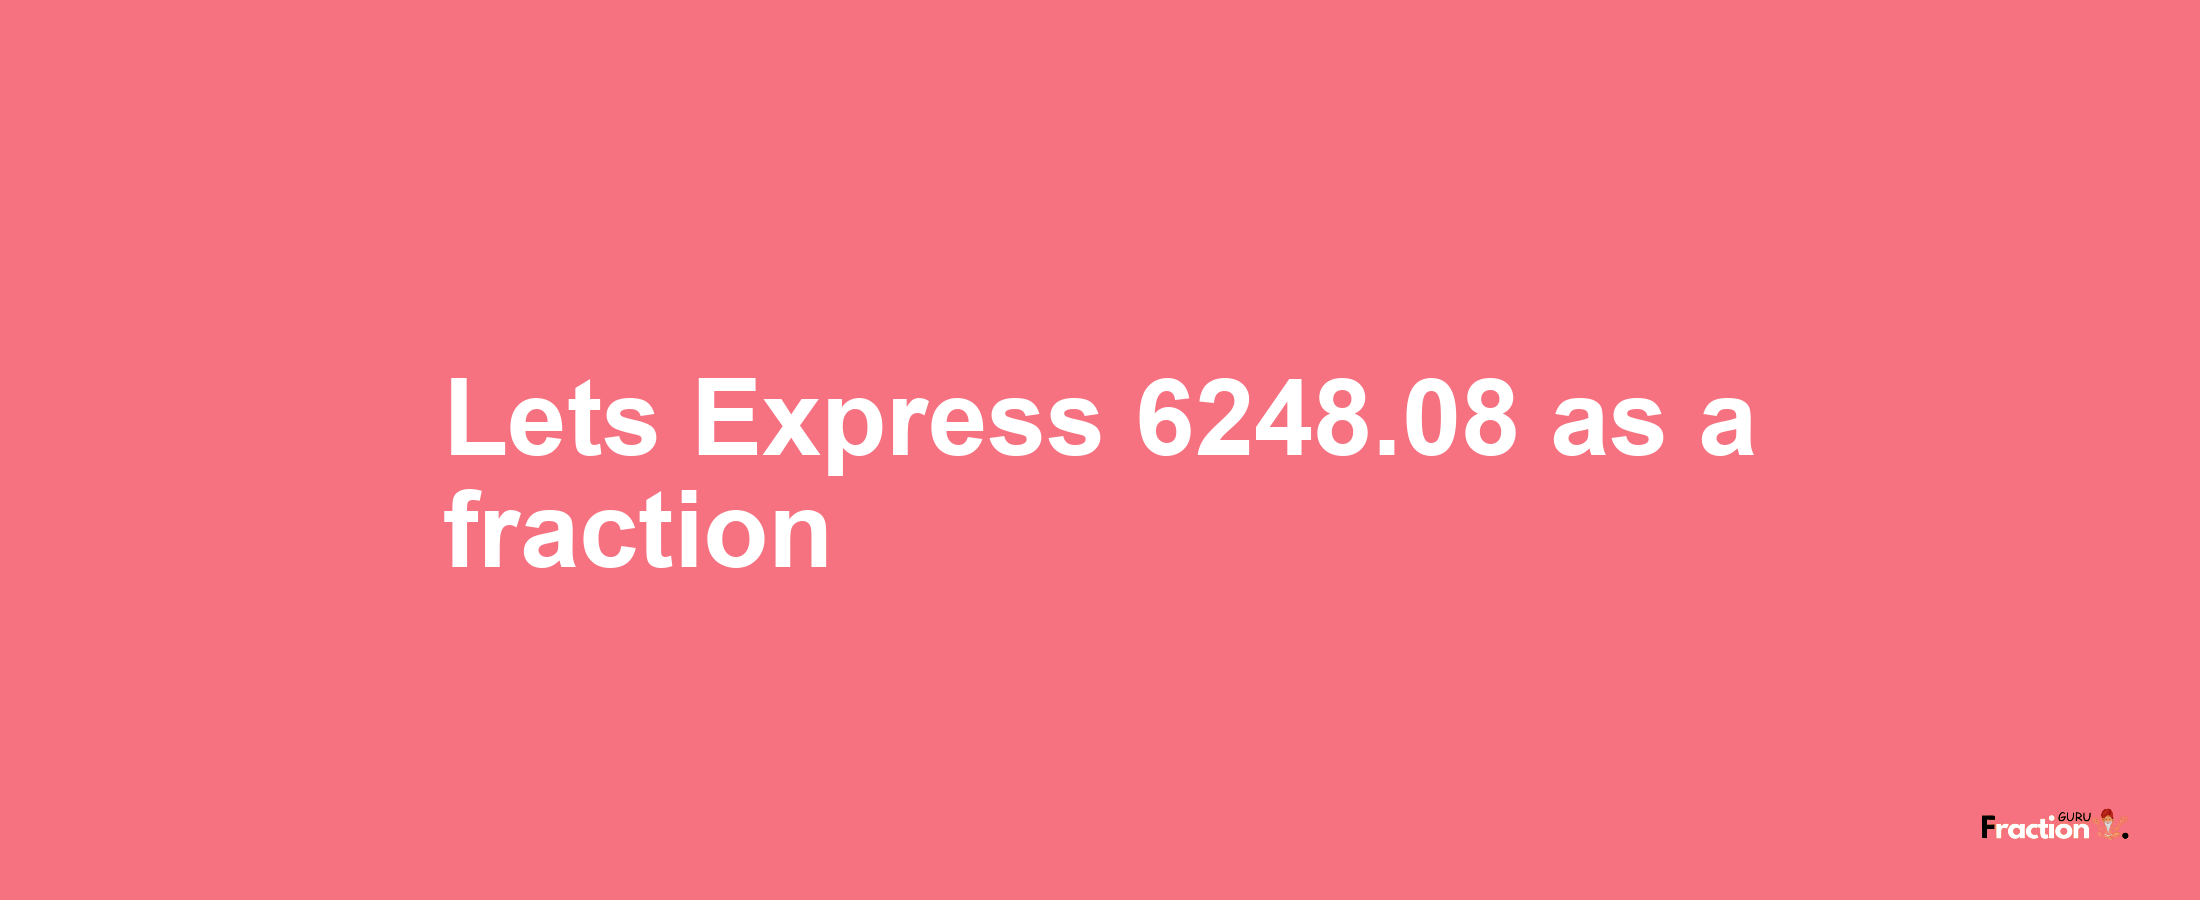 Lets Express 6248.08 as afraction